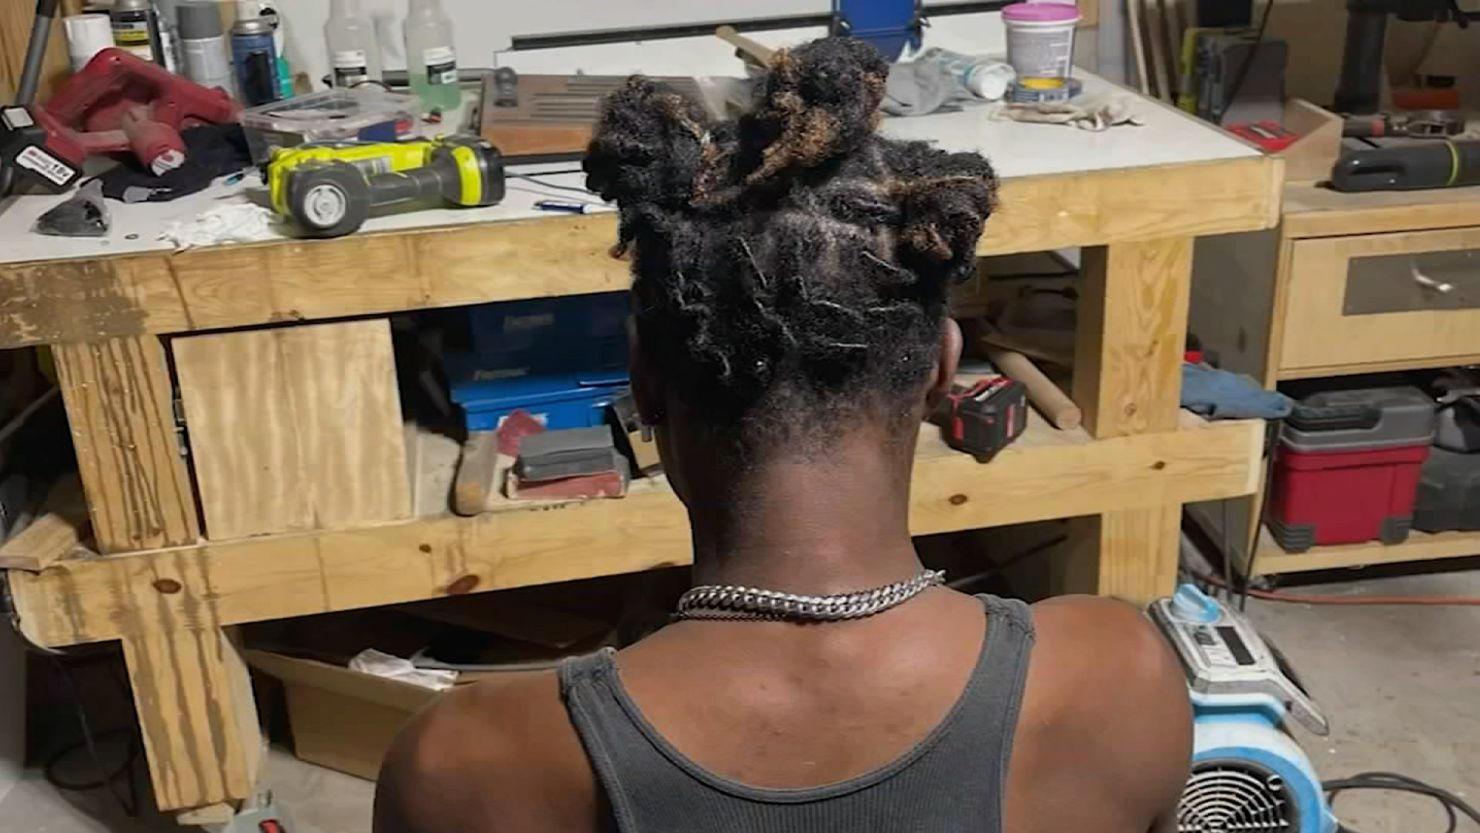 This is who I am': Texas law banning race-based hair